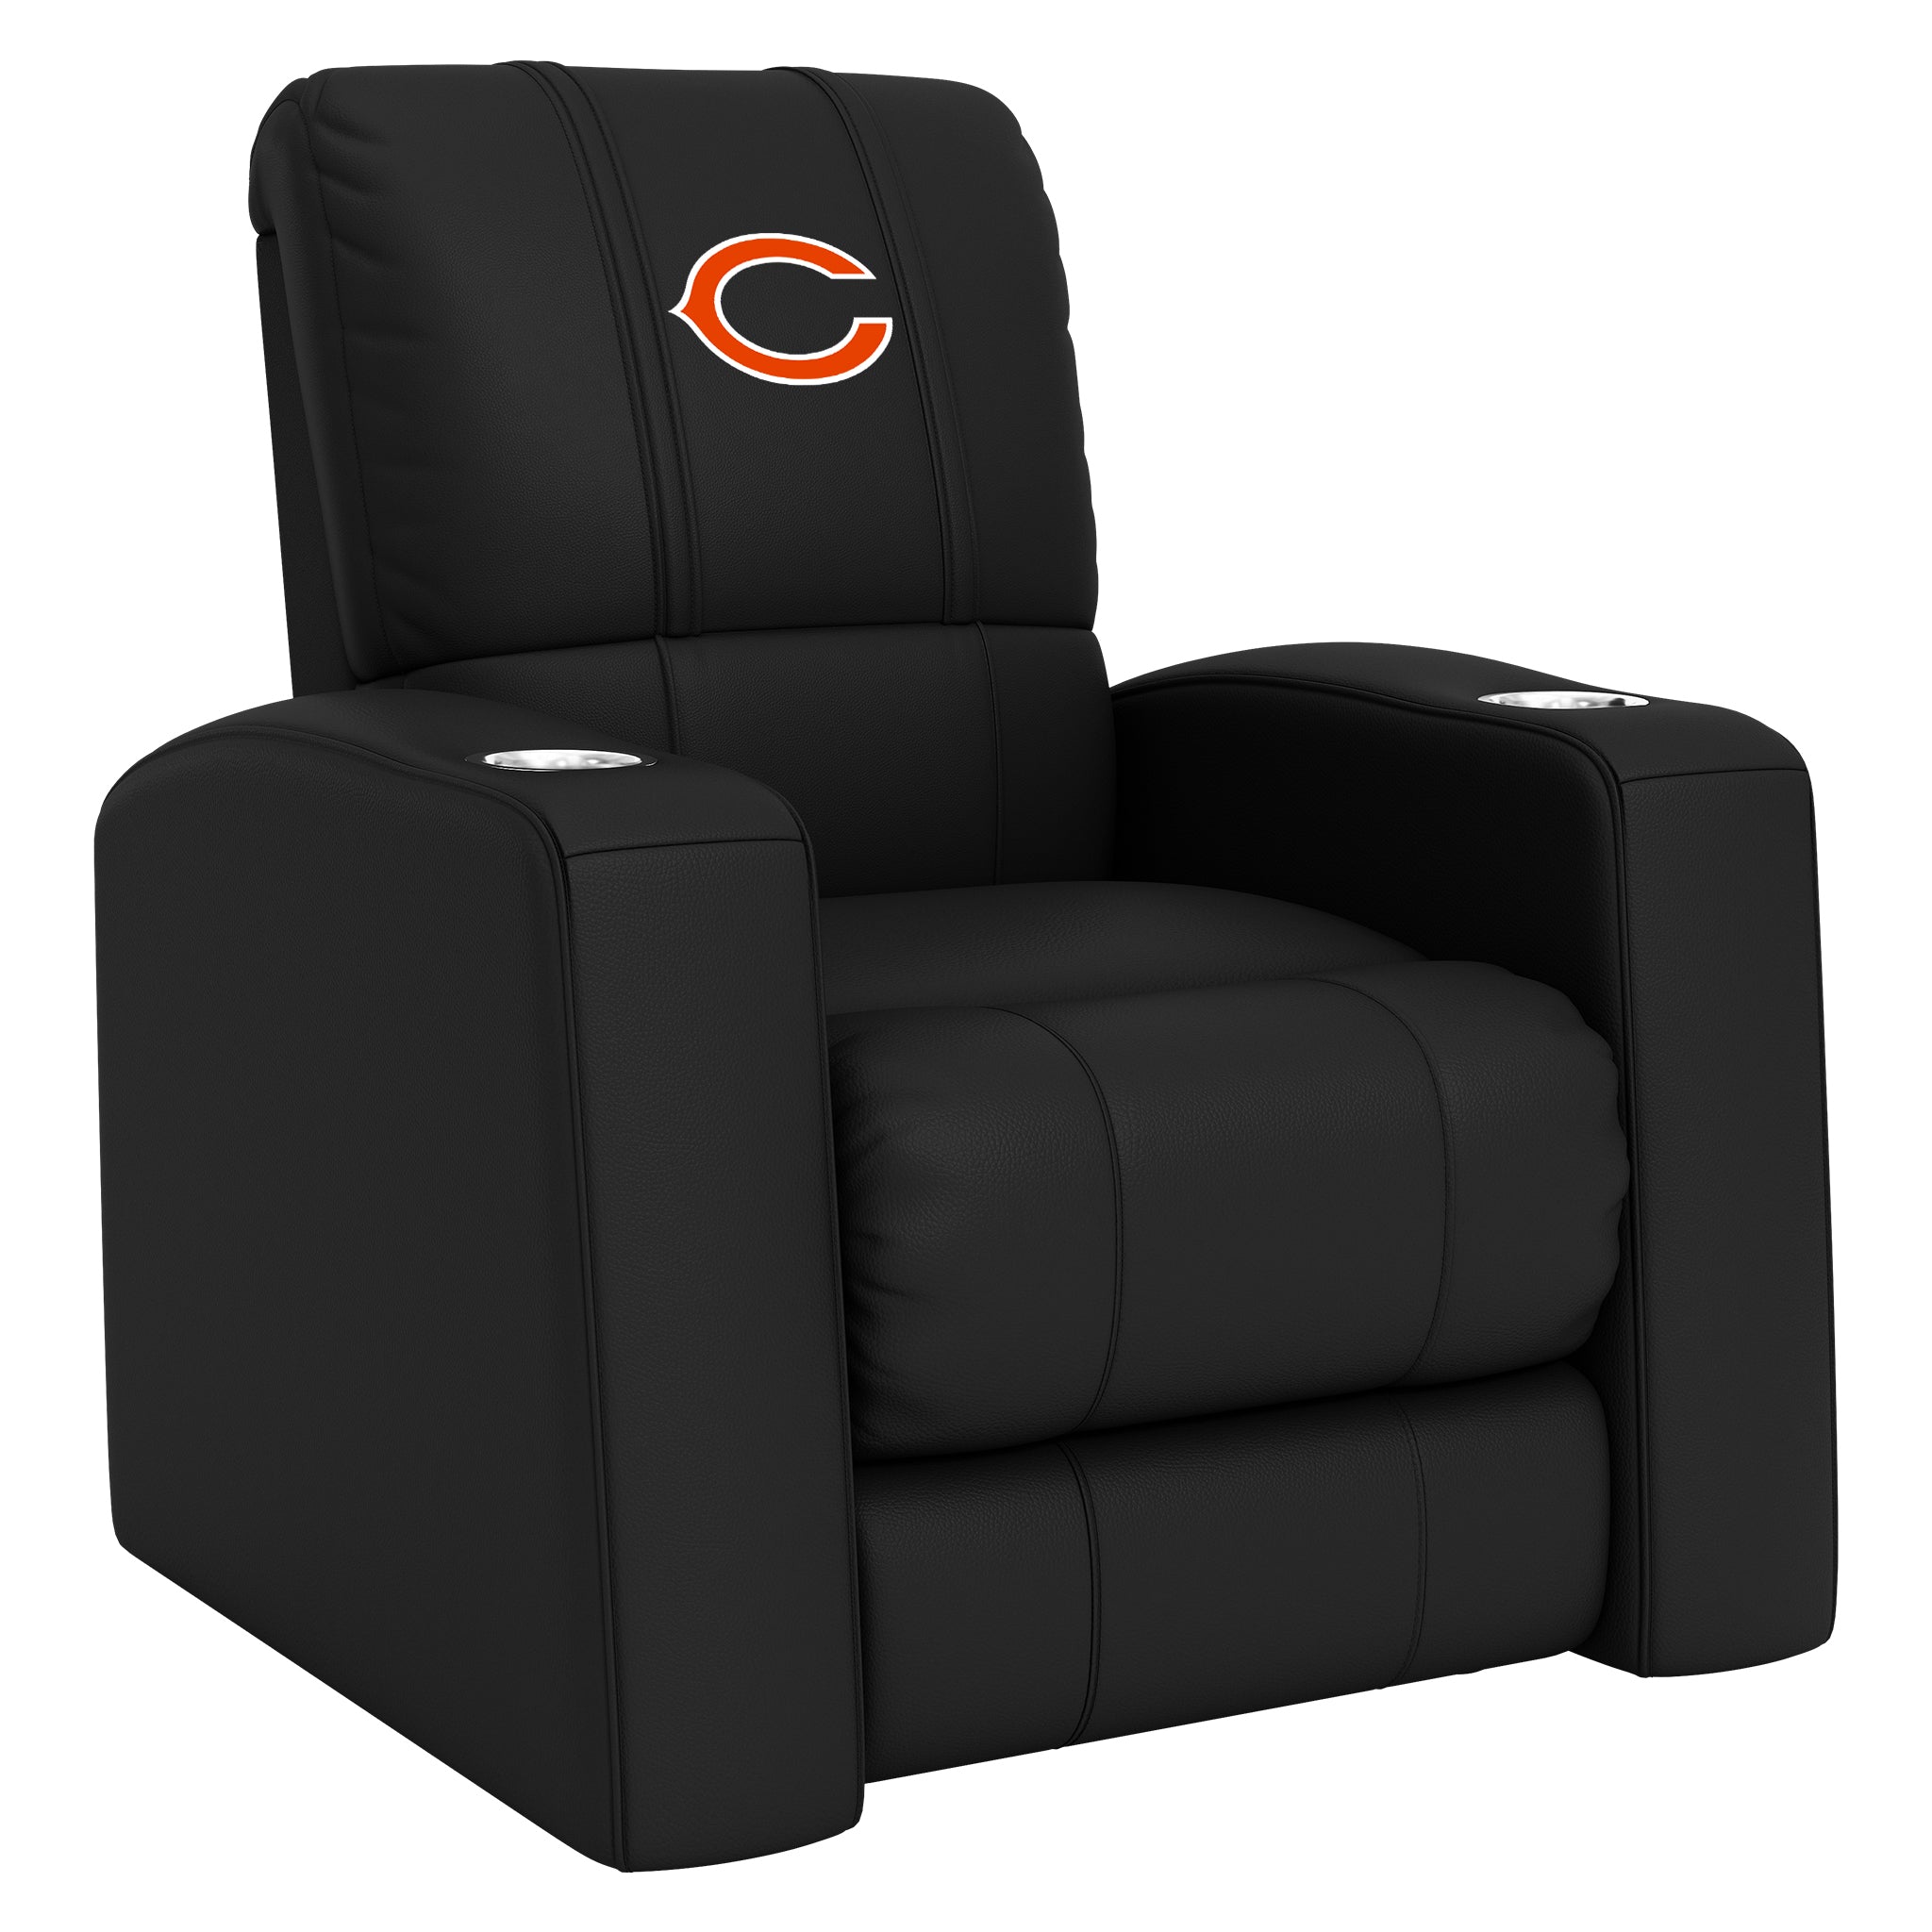 Chicago Bears Home Theater Recliner